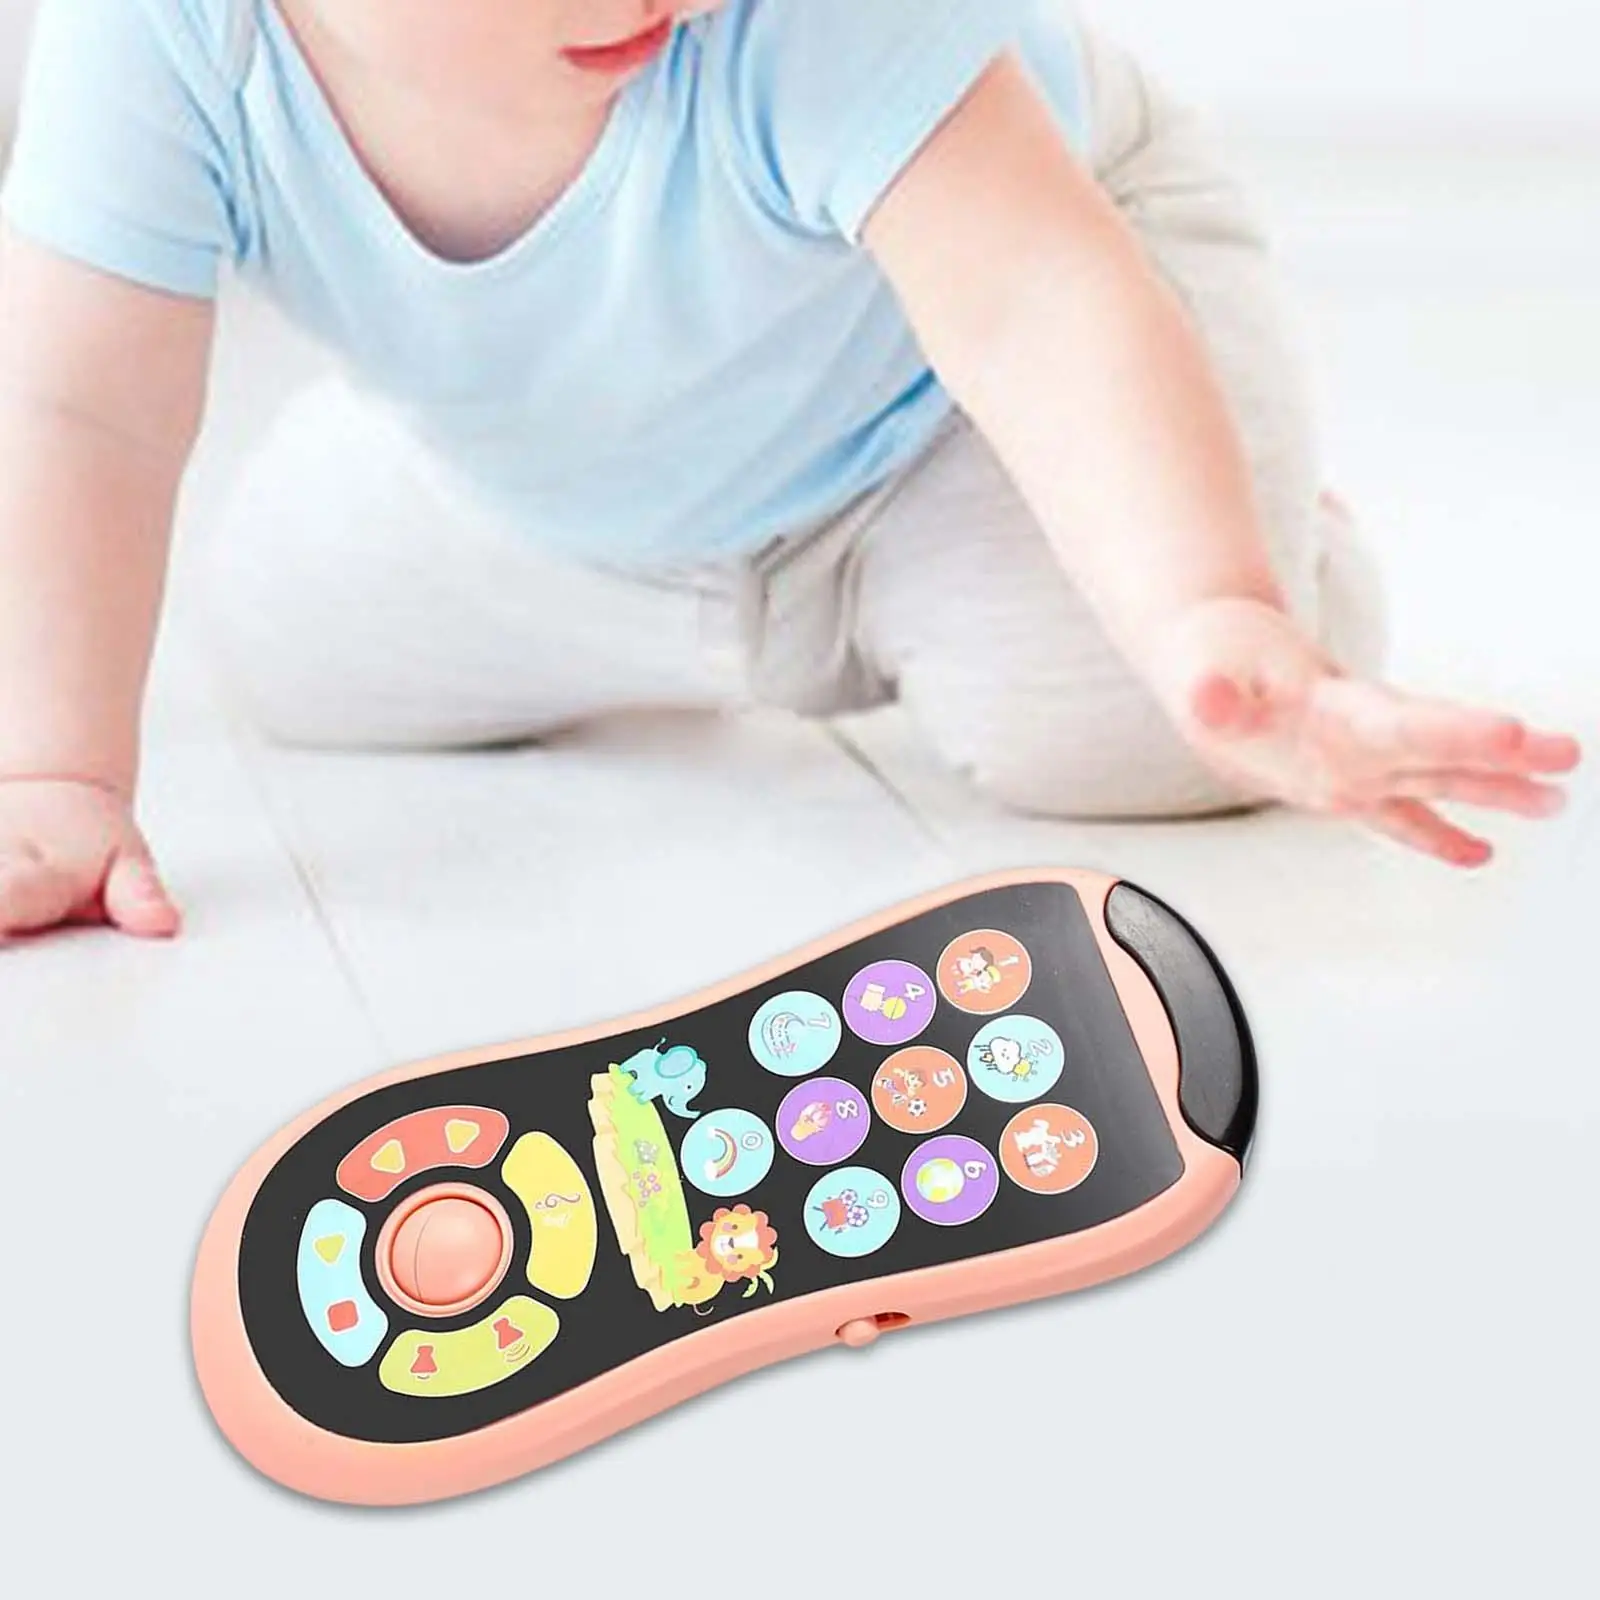 Portable Musical Phone Toys Learning Musical Toys Smartphone Toy for Preschool Toddlers Kids Boy Birthday Gift